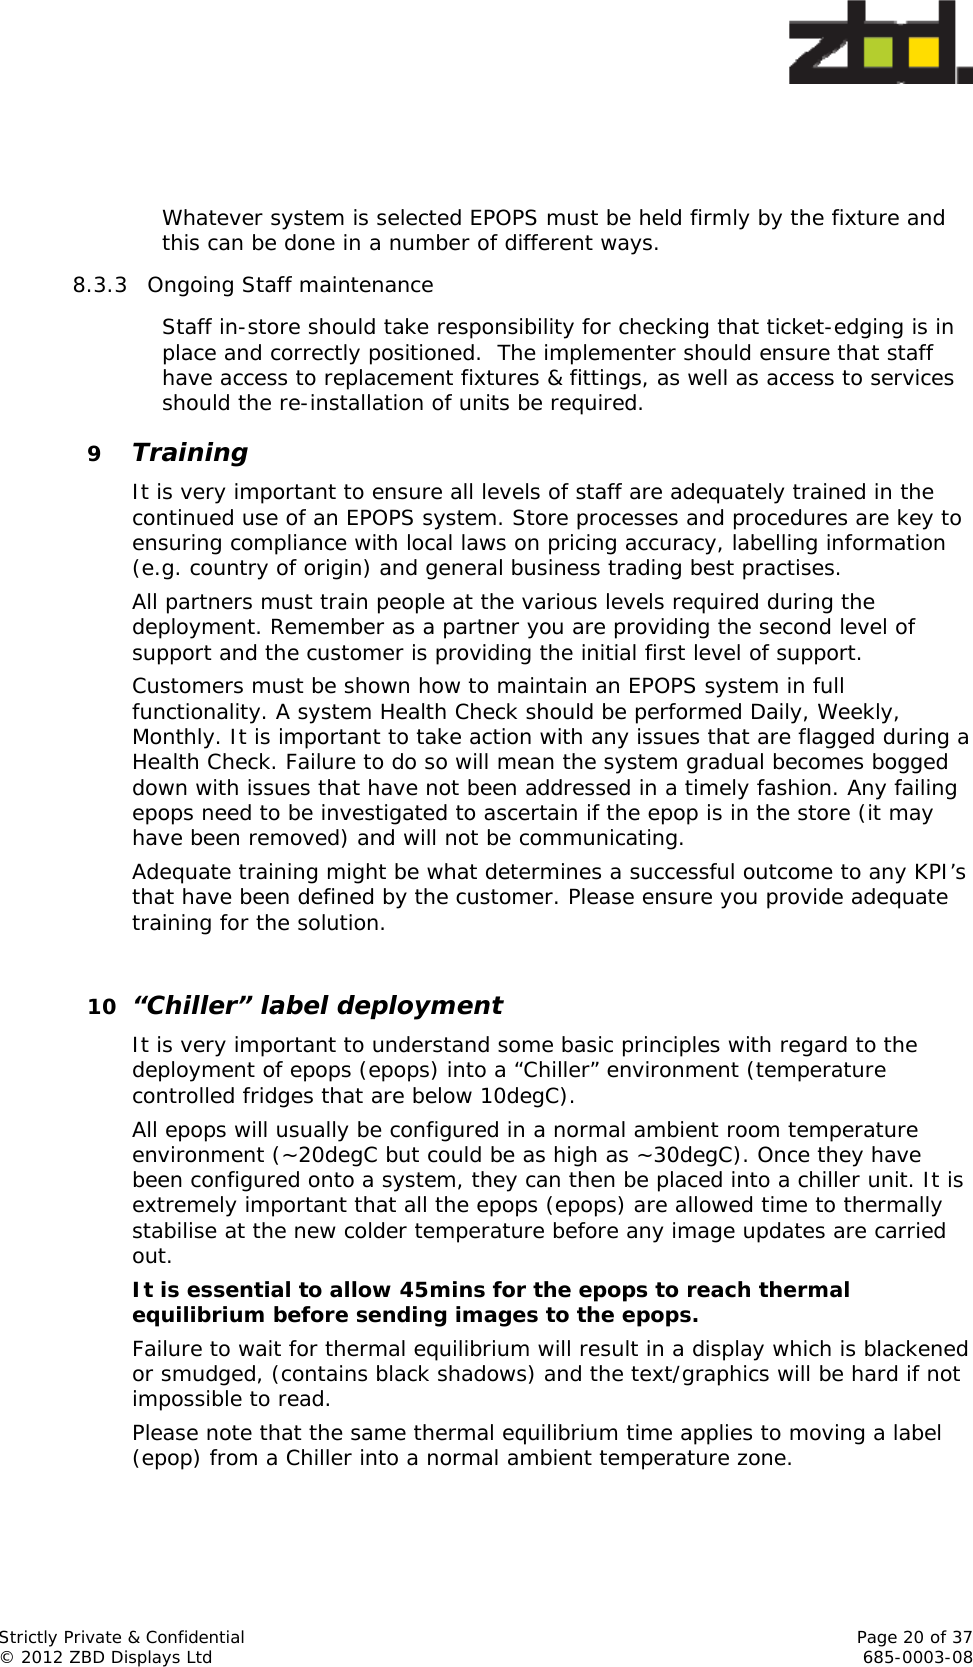  Strictly Private &amp; Confidential    Page 20 of 37 © 2012 ZBD Displays Ltd     685-0003-08    Whatever system is selected EPOPS must be held firmly by the fixture and this can be done in a number of different ways.  8.3.3 Ongoing Staff maintenance Staff in-store should take responsibility for checking that ticket-edging is in place and correctly positioned.  The implementer should ensure that staff have access to replacement fixtures &amp; fittings, as well as access to services should the re-installation of units be required.    9 Training It is very important to ensure all levels of staff are adequately trained in the continued use of an EPOPS system. Store processes and procedures are key to ensuring compliance with local laws on pricing accuracy, labelling information (e.g. country of origin) and general business trading best practises. All partners must train people at the various levels required during the deployment. Remember as a partner you are providing the second level of support and the customer is providing the initial first level of support. Customers must be shown how to maintain an EPOPS system in full functionality. A system Health Check should be performed Daily, Weekly, Monthly. It is important to take action with any issues that are flagged during a Health Check. Failure to do so will mean the system gradual becomes bogged down with issues that have not been addressed in a timely fashion. Any failing epops need to be investigated to ascertain if the epop is in the store (it may have been removed) and will not be communicating. Adequate training might be what determines a successful outcome to any KPI’s that have been defined by the customer. Please ensure you provide adequate training for the solution.  10 “Chiller” label deployment It is very important to understand some basic principles with regard to the deployment of epops (epops) into a “Chiller” environment (temperature controlled fridges that are below 10degC). All epops will usually be configured in a normal ambient room temperature environment (~20degC but could be as high as ~30degC). Once they have been configured onto a system, they can then be placed into a chiller unit. It is extremely important that all the epops (epops) are allowed time to thermally stabilise at the new colder temperature before any image updates are carried out. It is essential to allow 45mins for the epops to reach thermal equilibrium before sending images to the epops. Failure to wait for thermal equilibrium will result in a display which is blackened or smudged, (contains black shadows) and the text/graphics will be hard if not impossible to read. Please note that the same thermal equilibrium time applies to moving a label (epop) from a Chiller into a normal ambient temperature zone. 